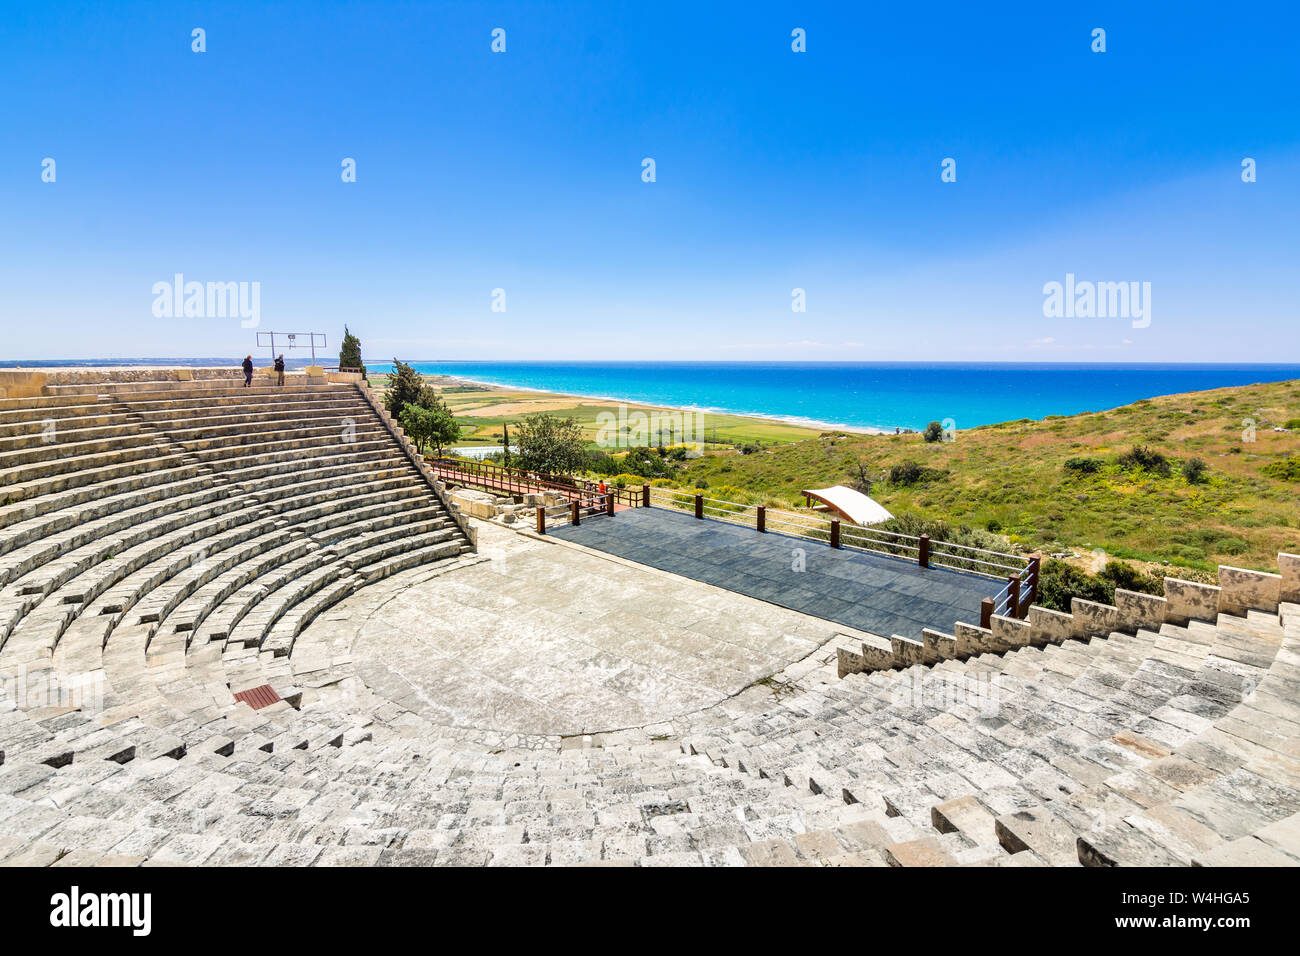 The Roman theater at Ancient Kourion, district of Lemessos (Limassol), Cyprus Stock Photo